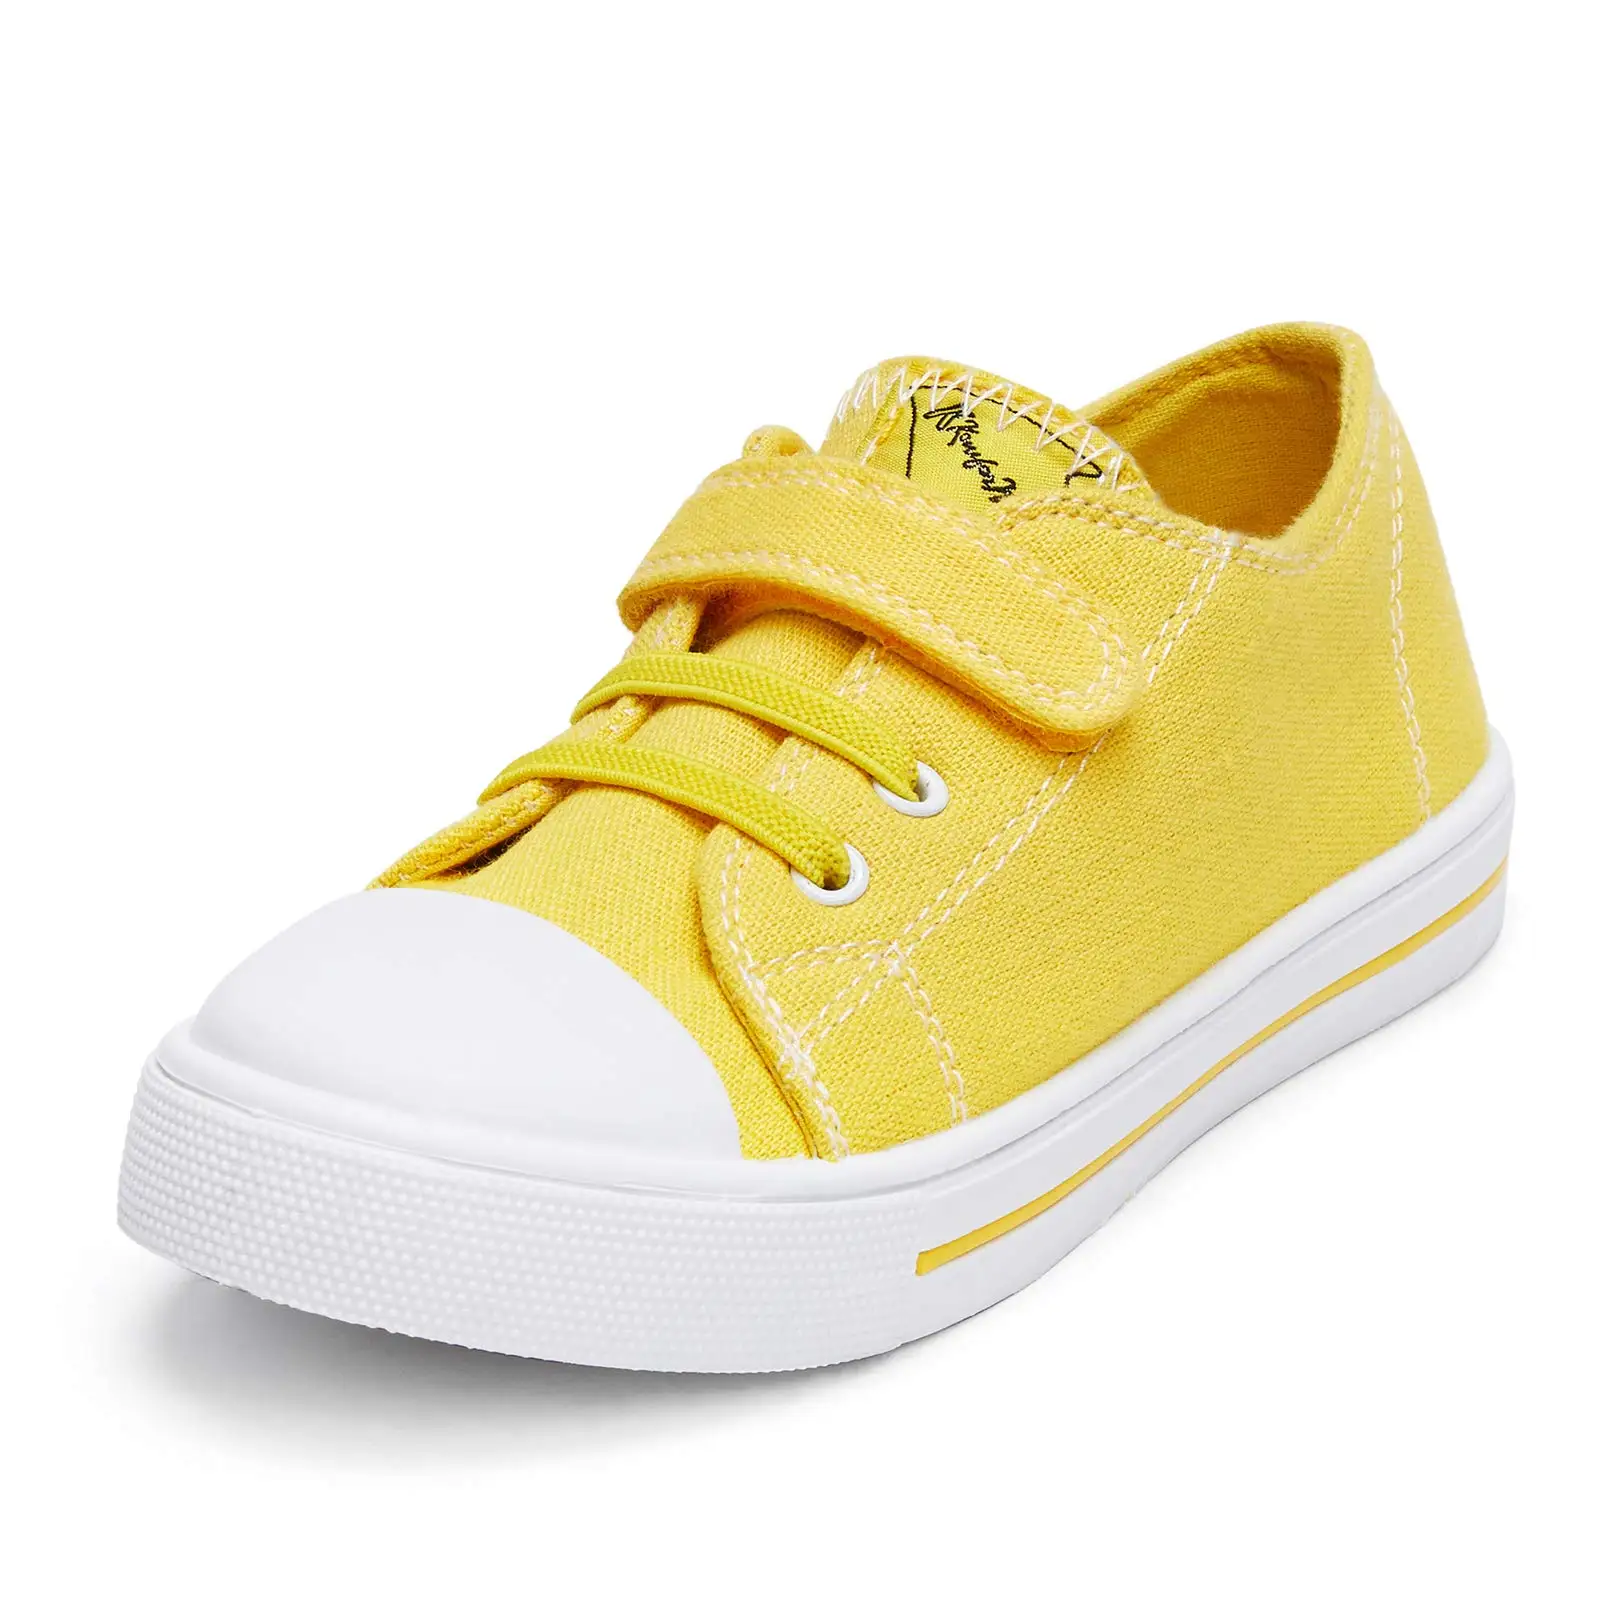 HOOk&LOOP Canvas Shoes Fabric Strap Children Casual Toddler Little Kid Walking Canvas Shoes